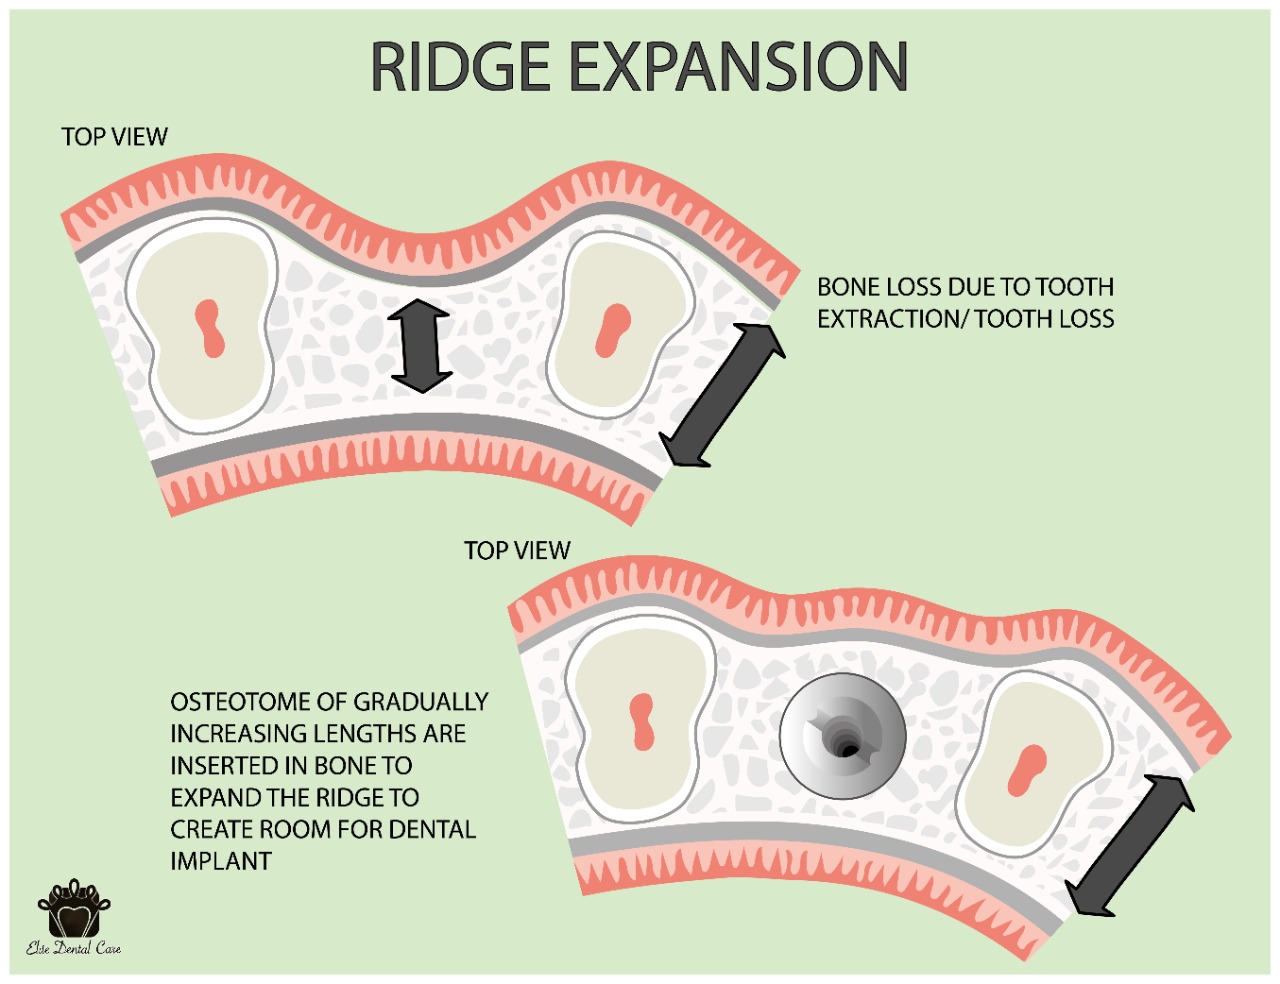 Ridge Expansion and Technique – Elite Dental Care Tracy